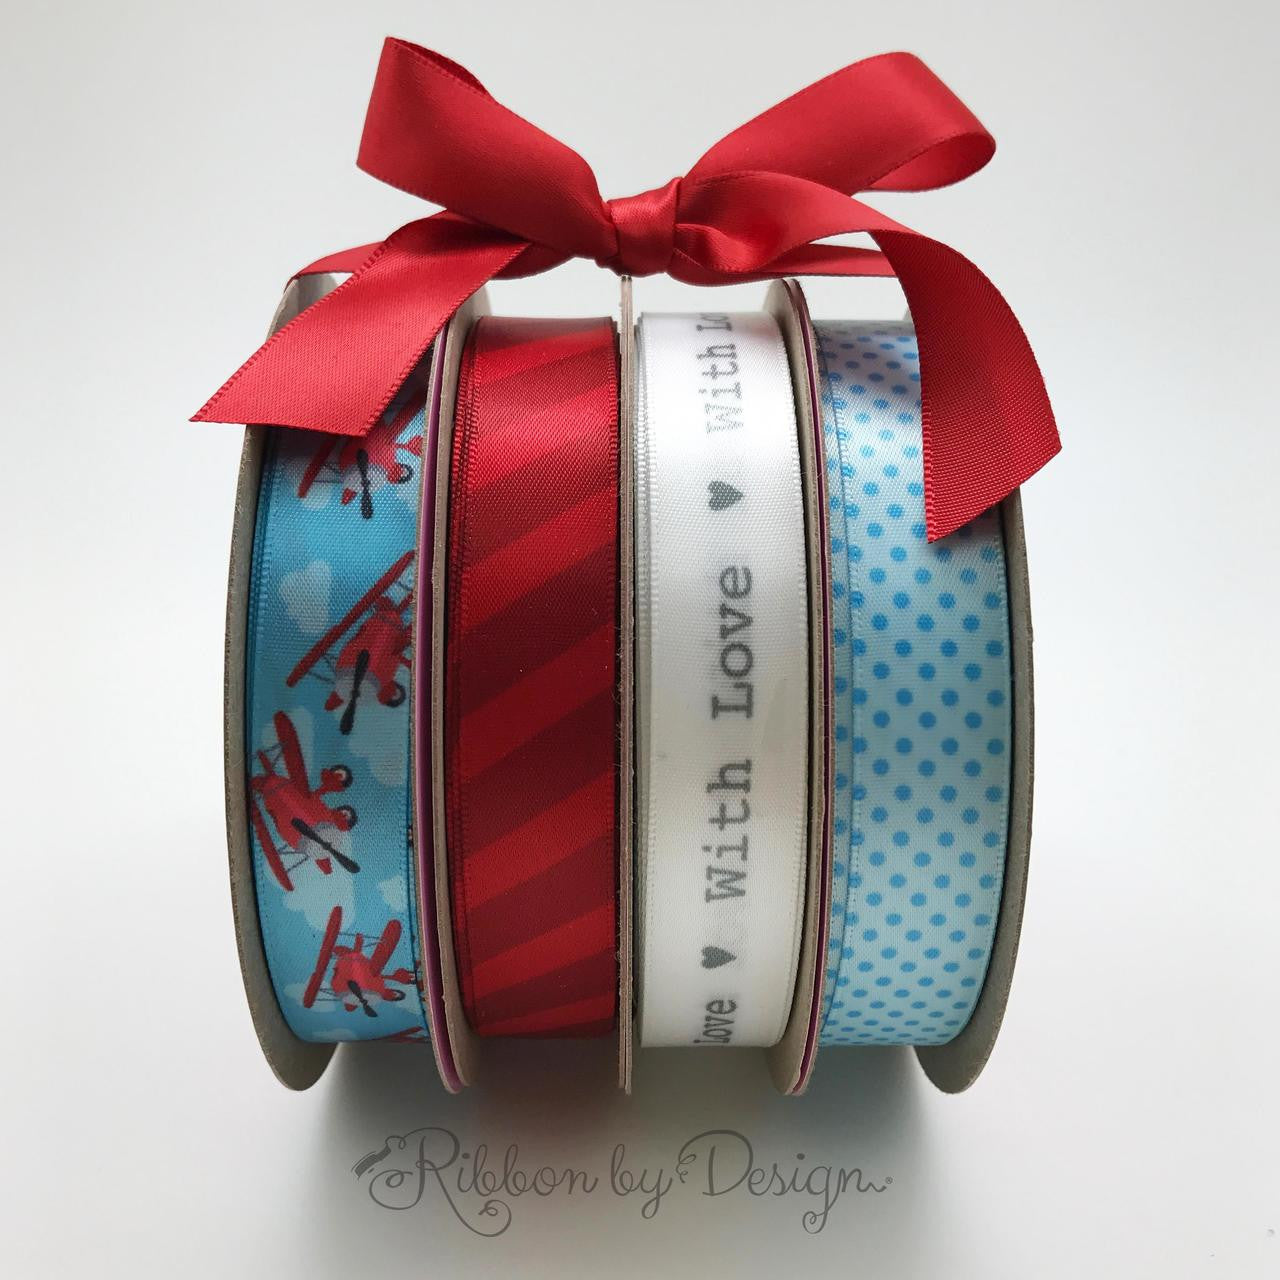 Combine our airplane ribbon with red stripes and light blue pin dots to complete the decor of a party. Add our "With Love" ribbon for favors at a shower or reveal party!